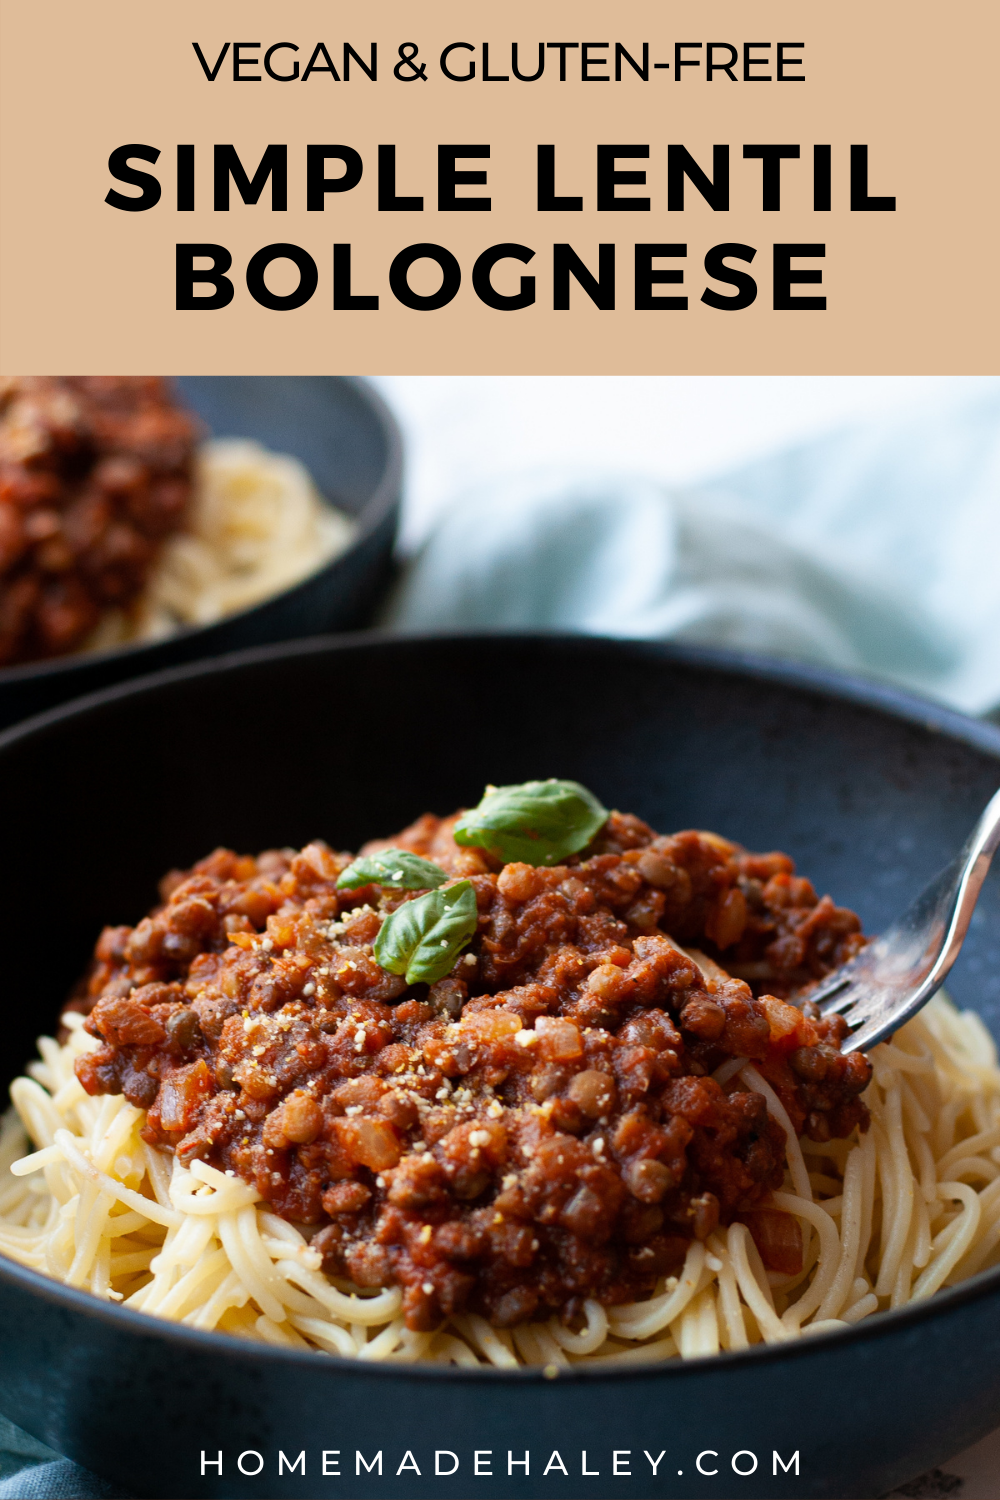 Simple Vegan Lentil Bolognese is the perfect quick weeknight meal for the whole family. It's gluten-free, comes together in under 30 minutes, and uses store-bought ingredients for an easy "dump & go" dinner!